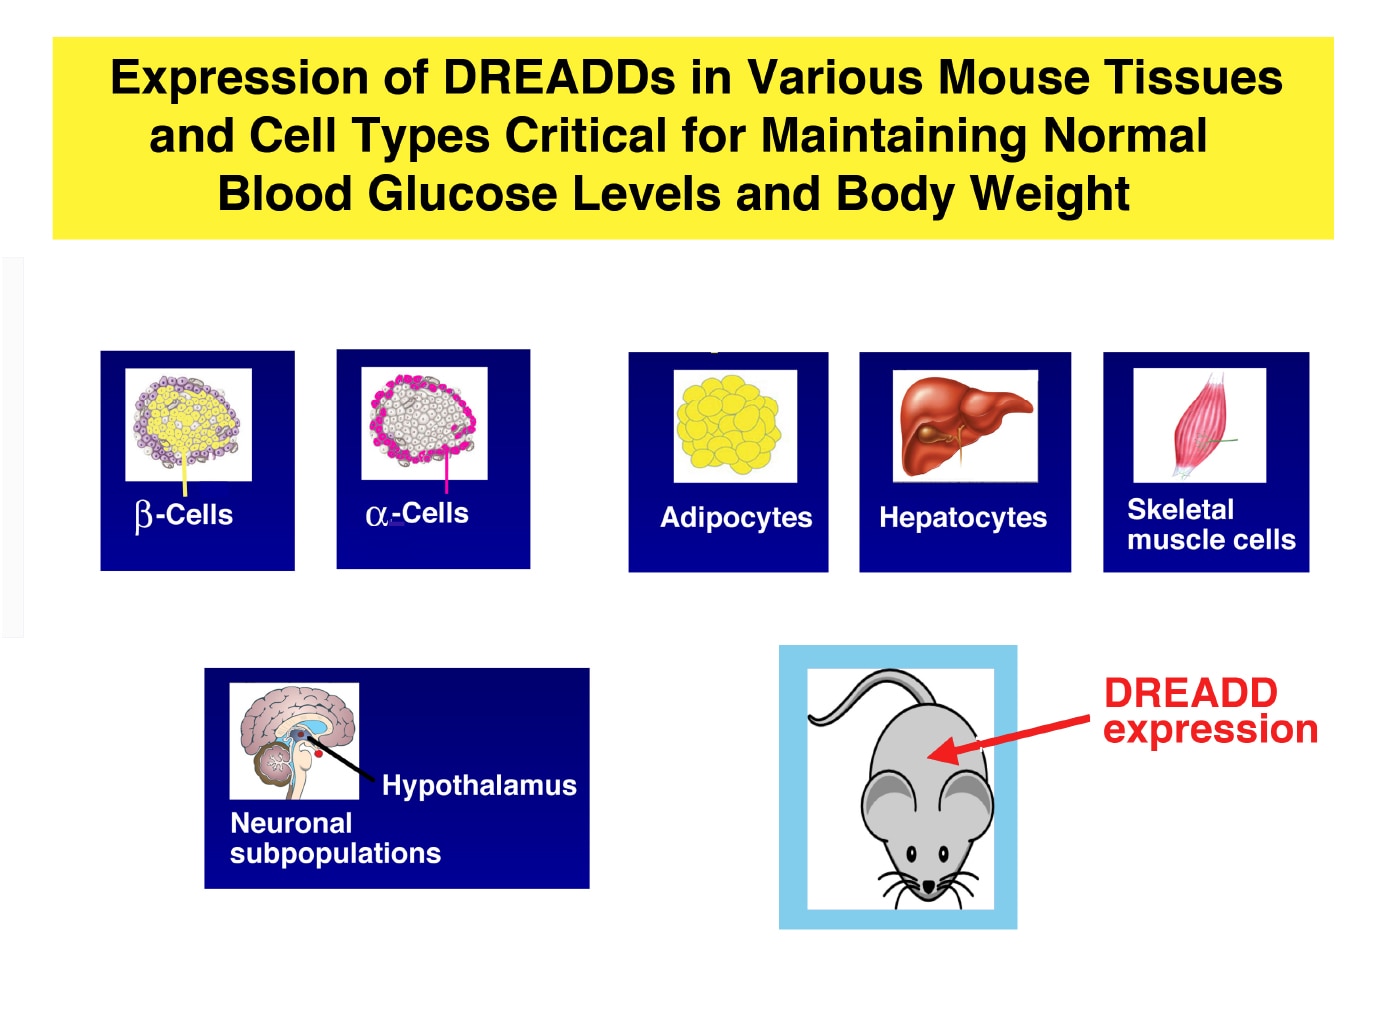 Expression of designer GPCRs known as DREADDs in metabolically important cell types